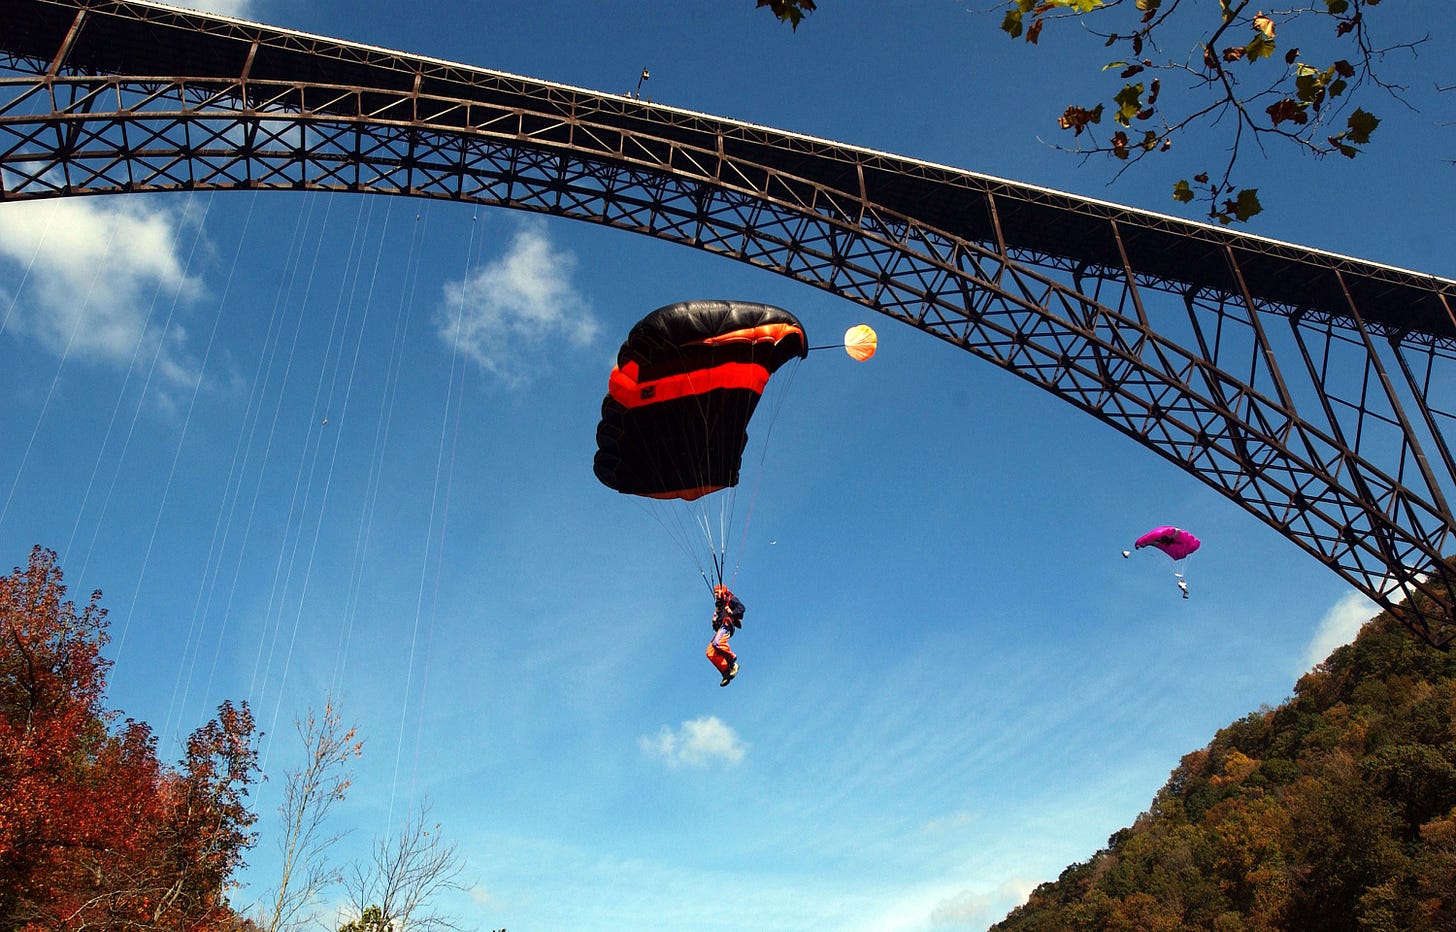 Bridge jumping, rappelling draw thrill seekers to this October festival